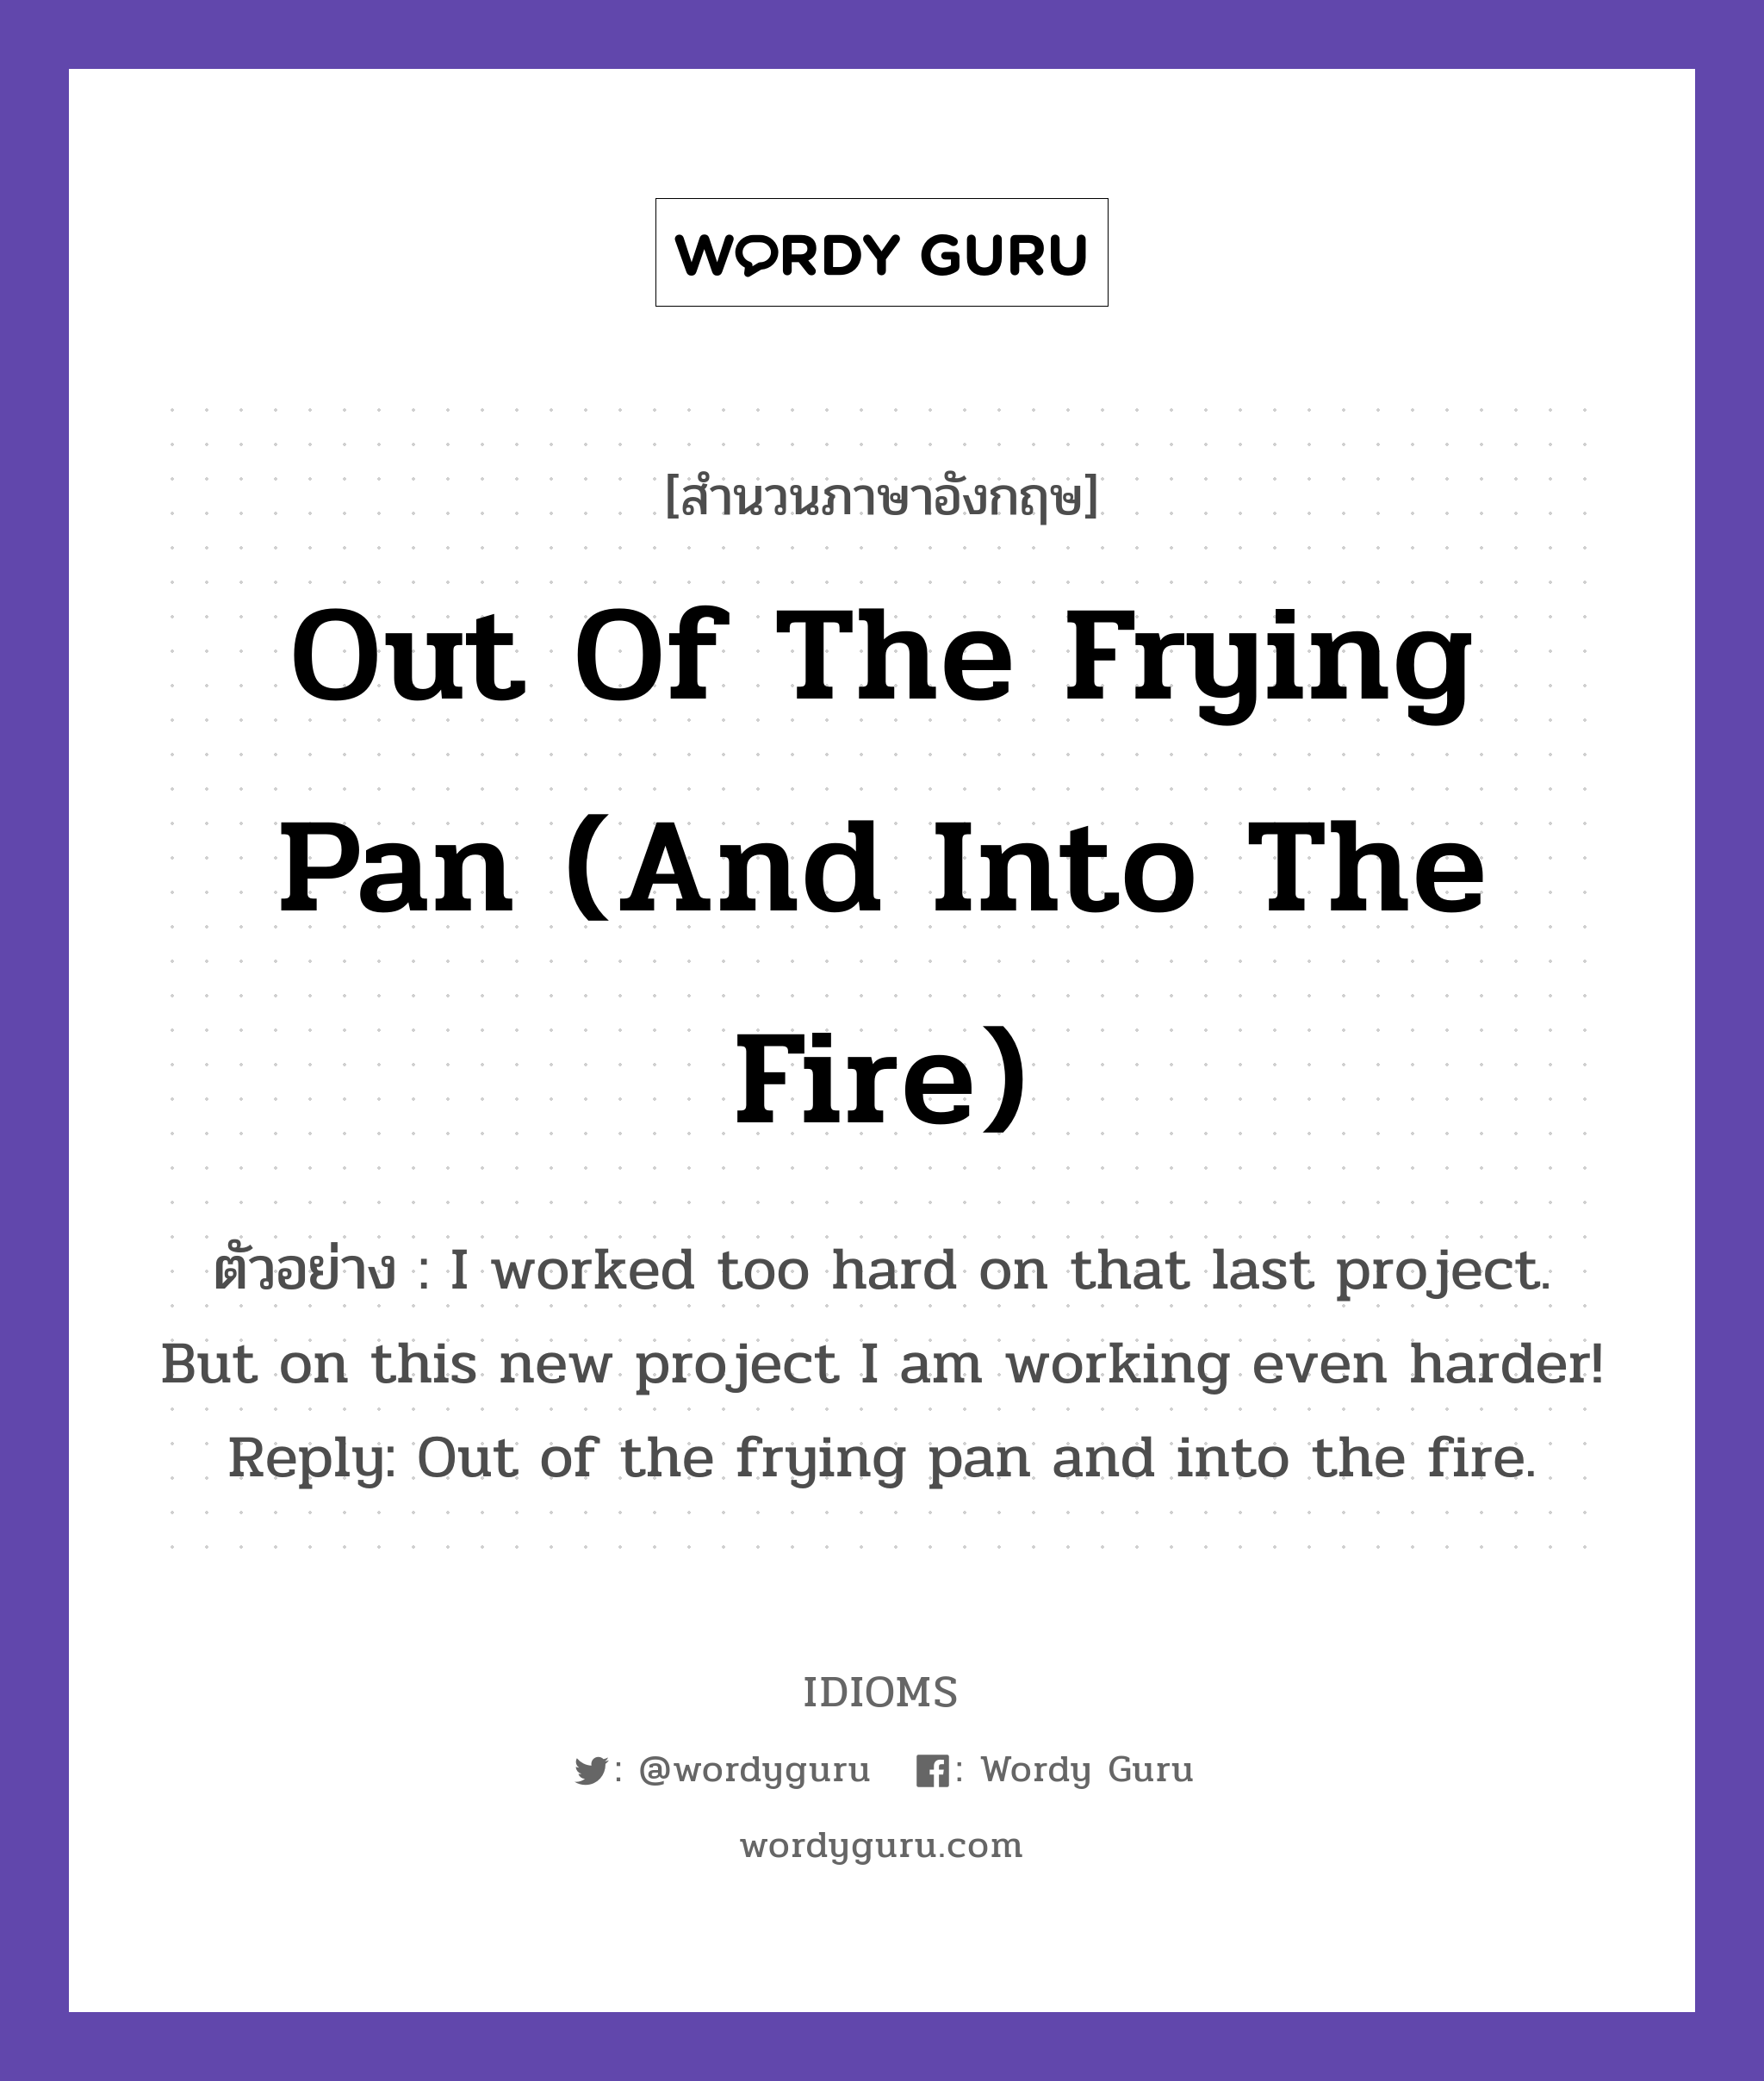 Out Of The Frying Pan (And Into The Fire) แปลว่า?, สำนวนภาษาอังกฤษ Out Of The Frying Pan (And Into The Fire) ตัวอย่าง I worked too hard on that last project. But on this new project I am working even harder! Reply: Out of the frying pan and into the fire.